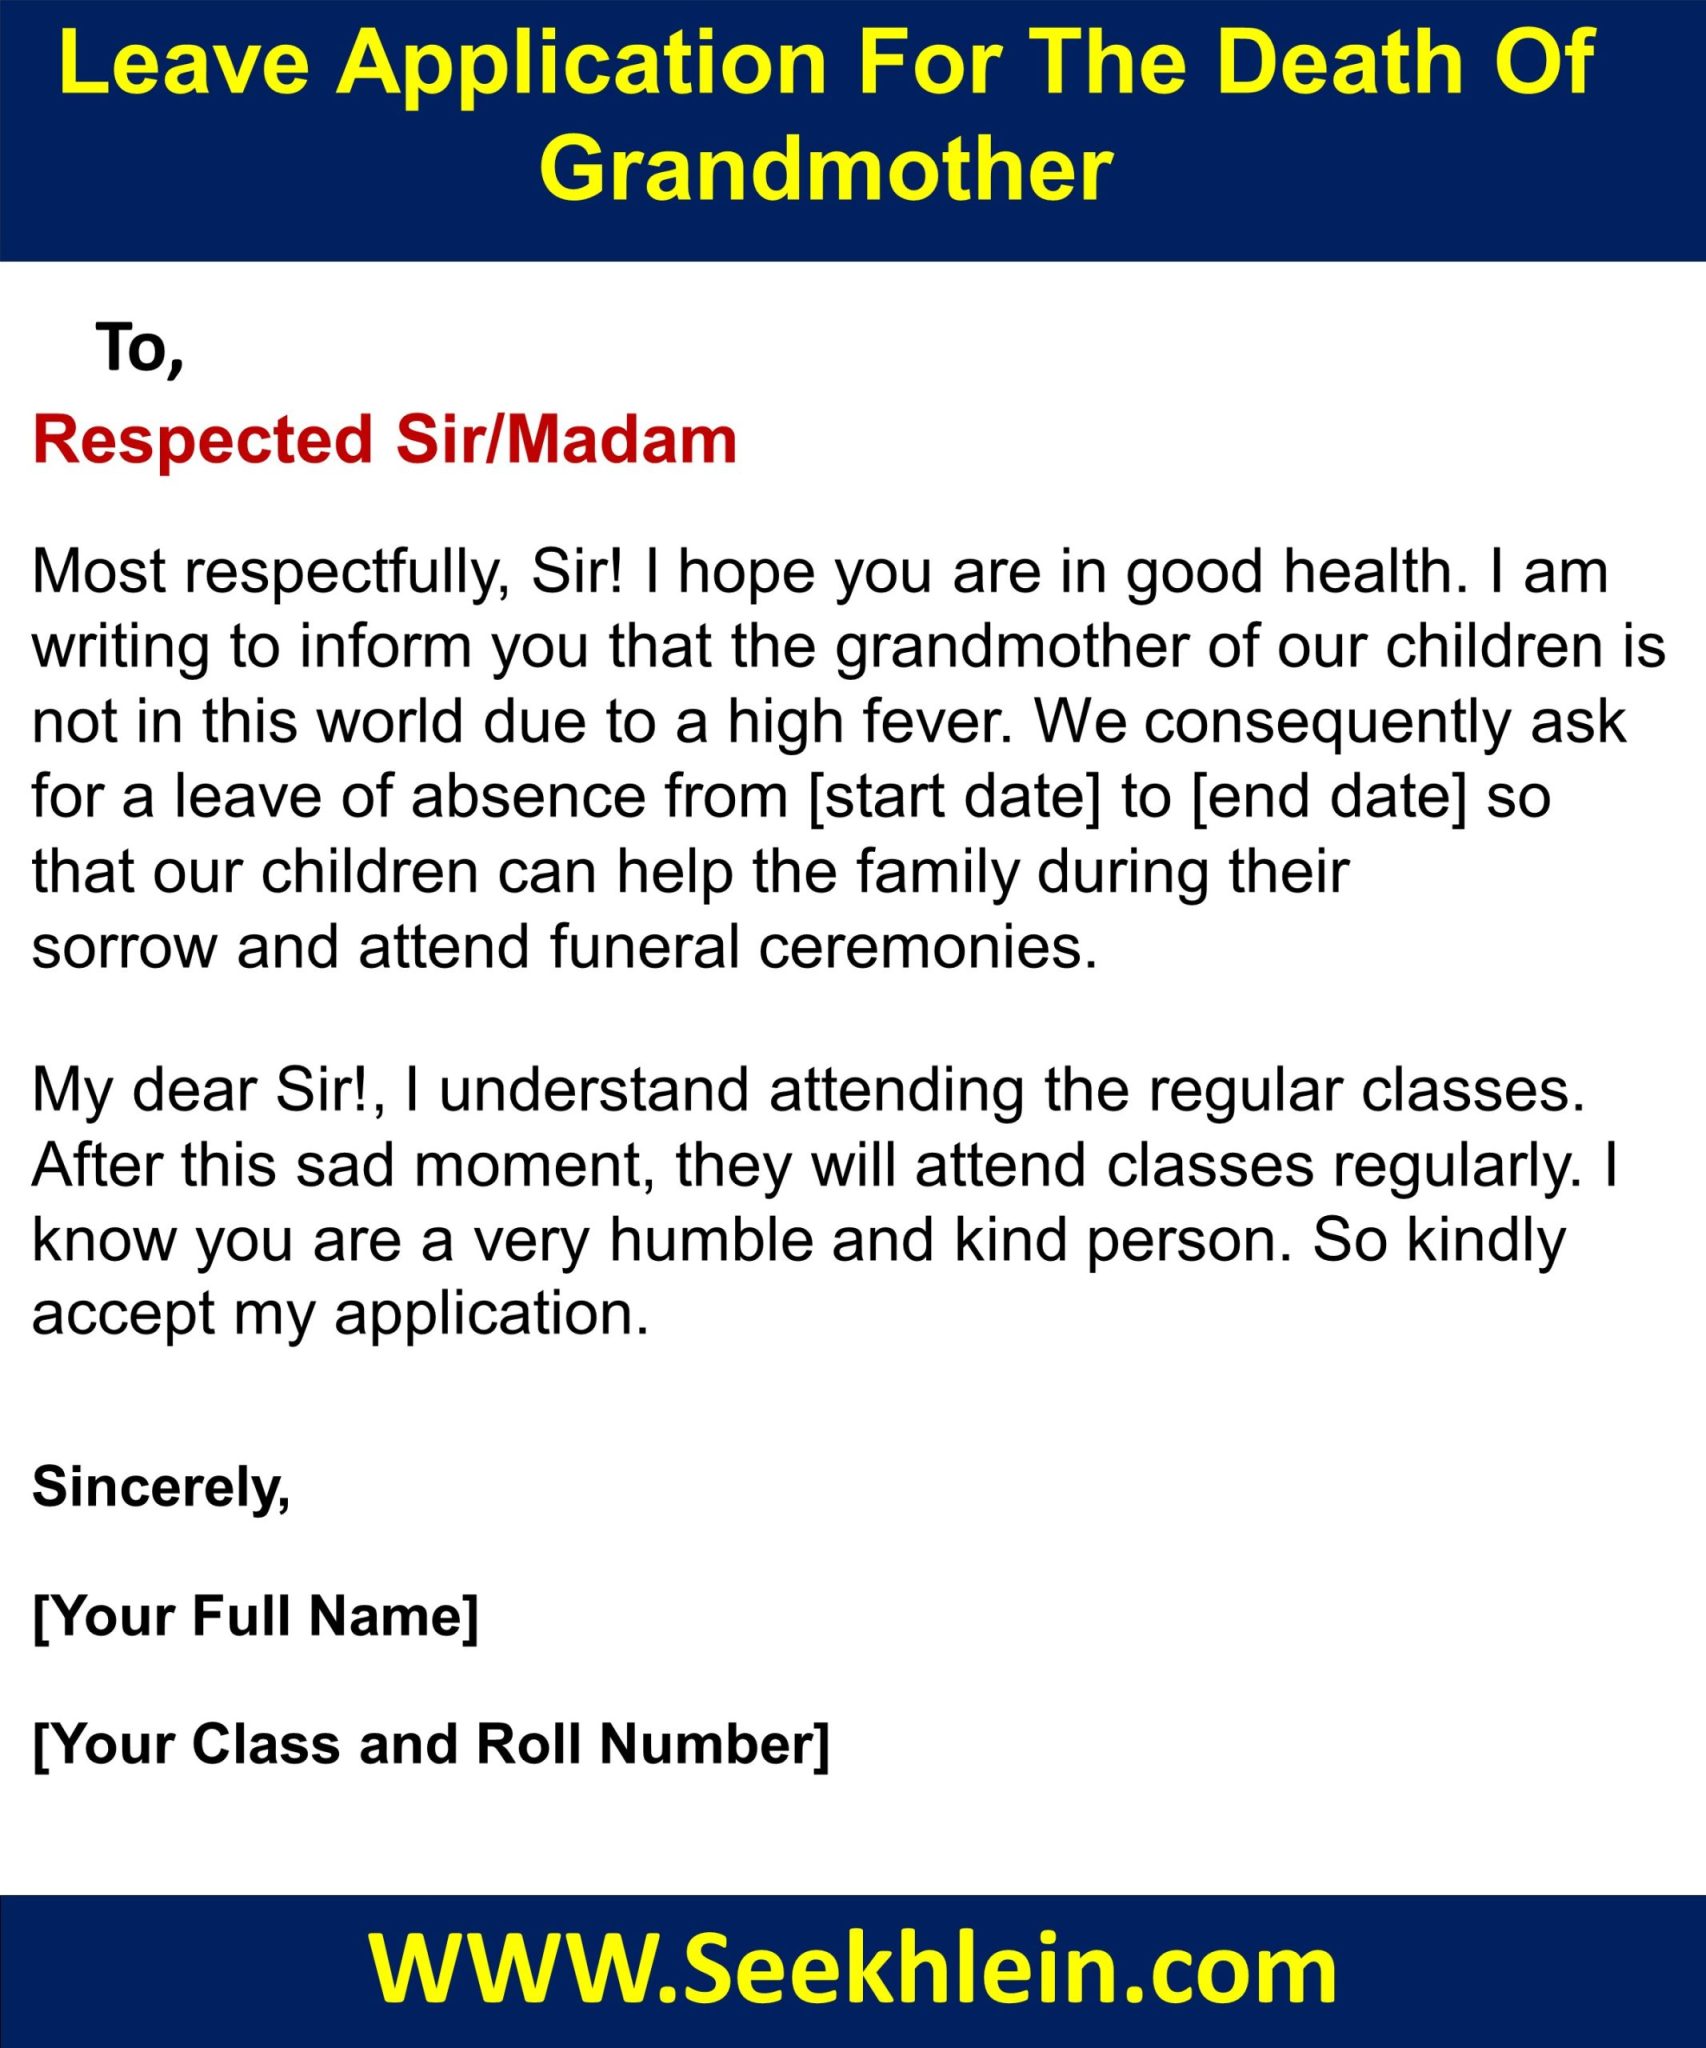 Leave Application For Grandmother Death For School by Parents 